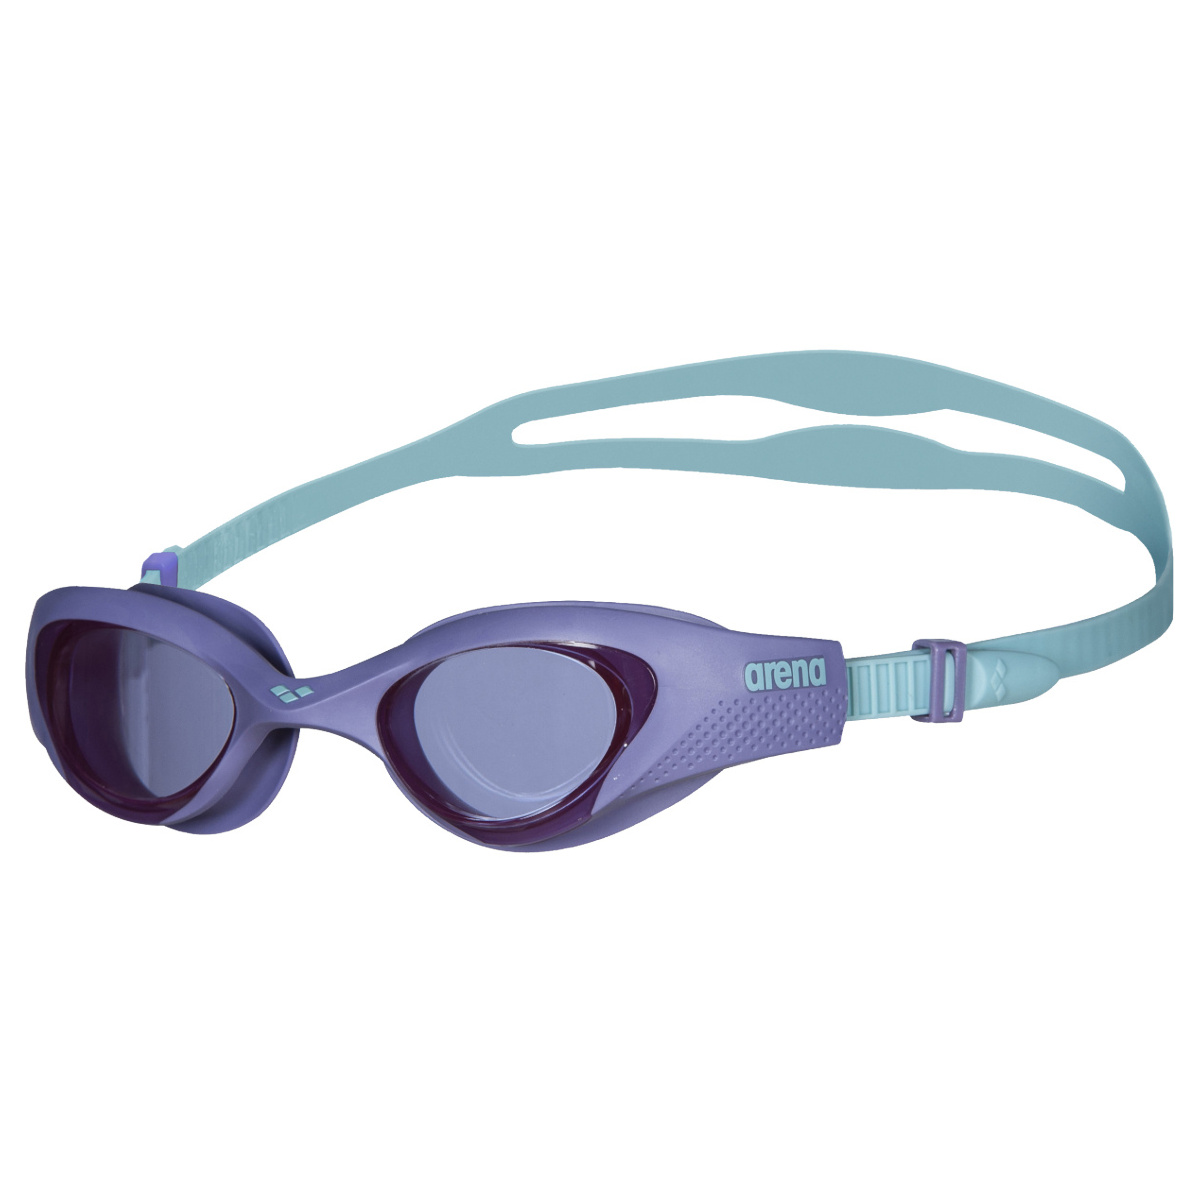 Image of arena The One Swimming Goggles Women - Smoke - Violet/Turquoise